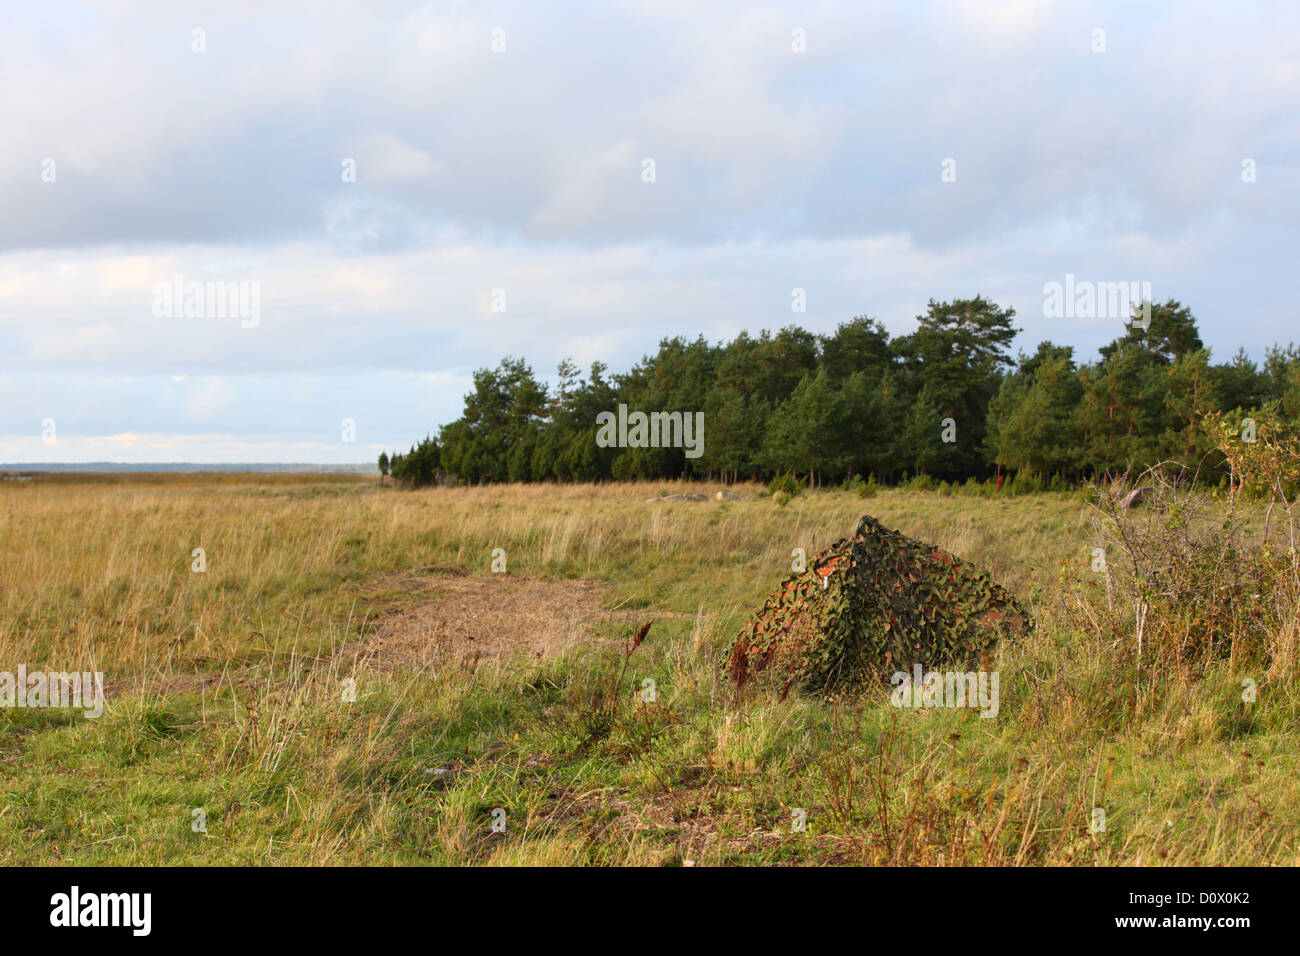 Photographic hide covered with camouflage net, ready for shooting birds and mammals. Europe, Estonia Stock Photo